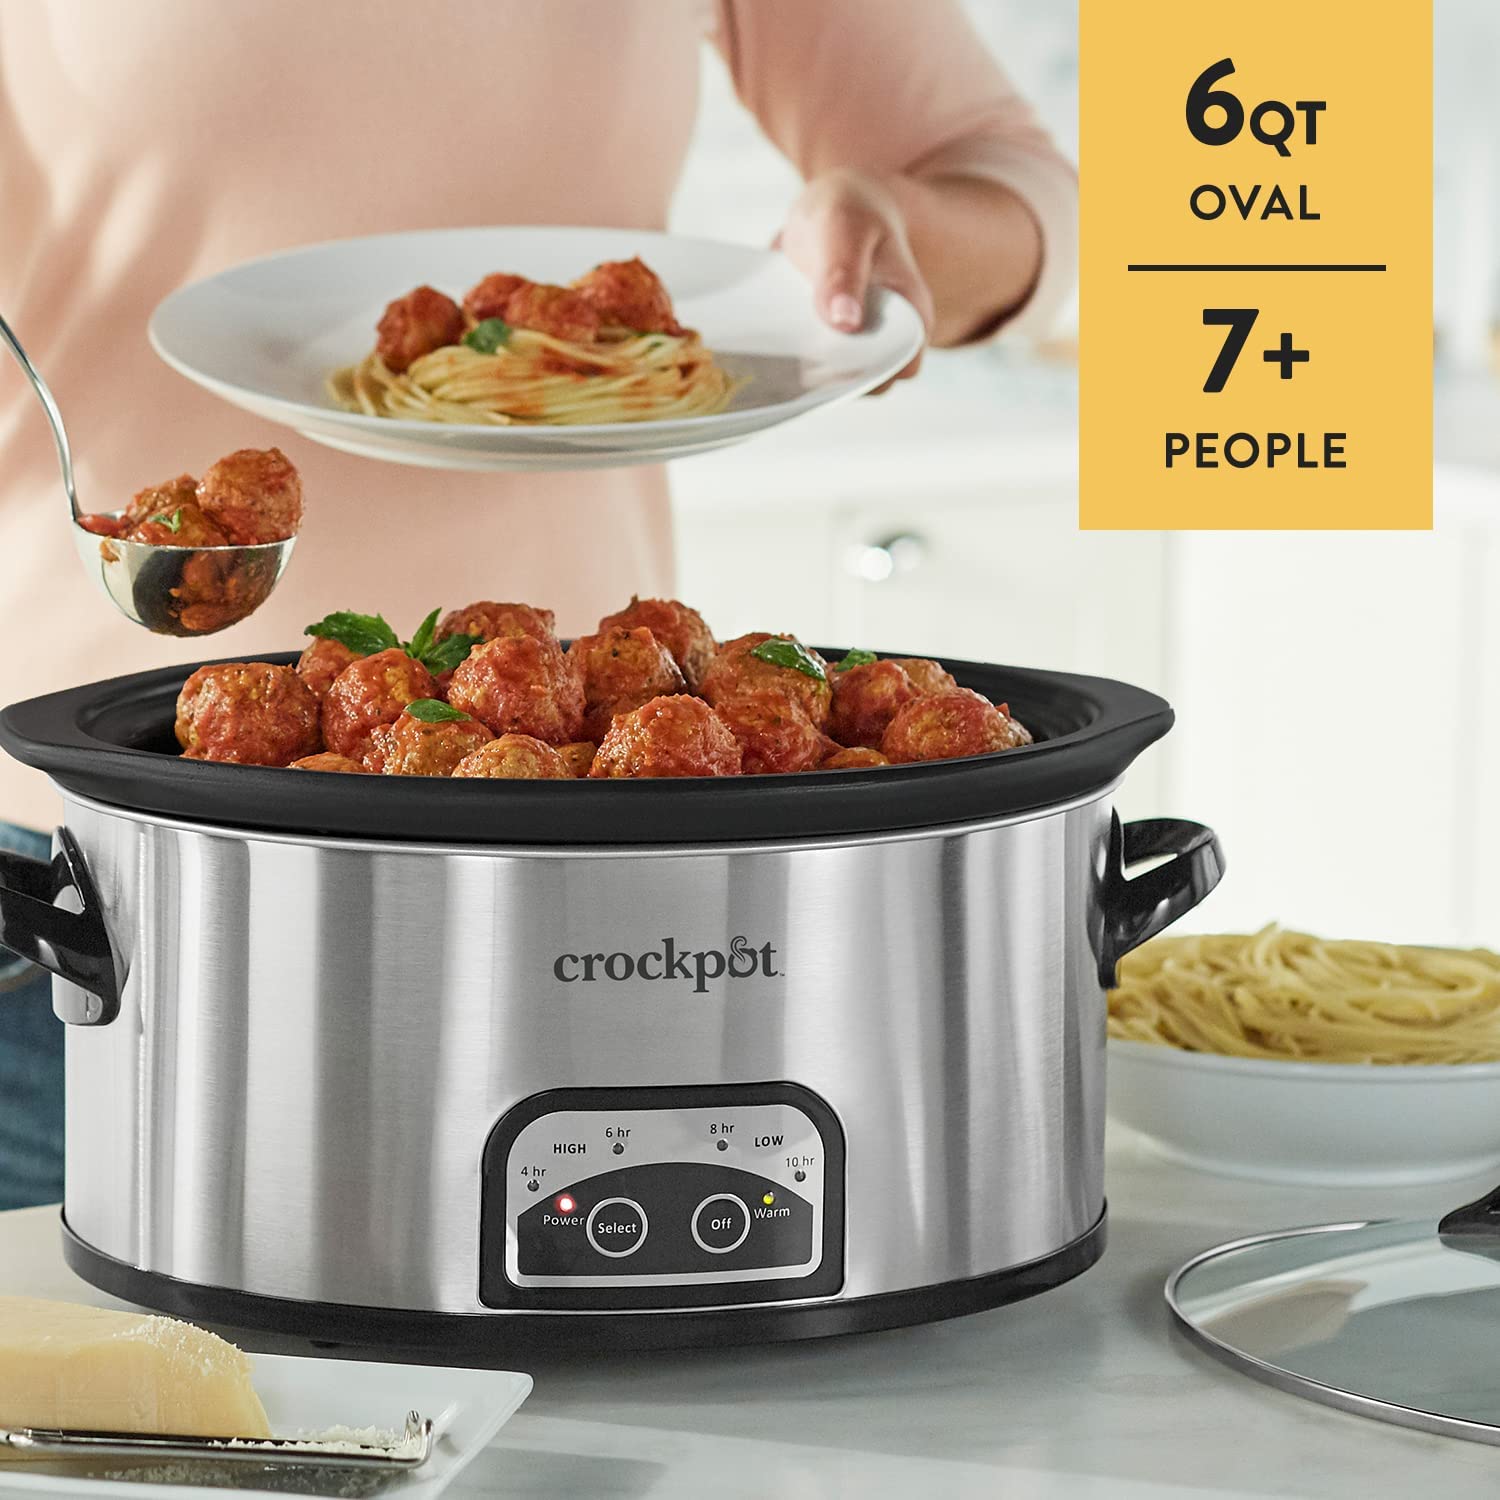 https://bigbigmart.com/wp-content/uploads/2023/03/Crock-Pot-6-Quart-Slow-Cooker-with-Auto-Warm-Setting-and-Programmable-Controls-Stainless-Steel9.jpg